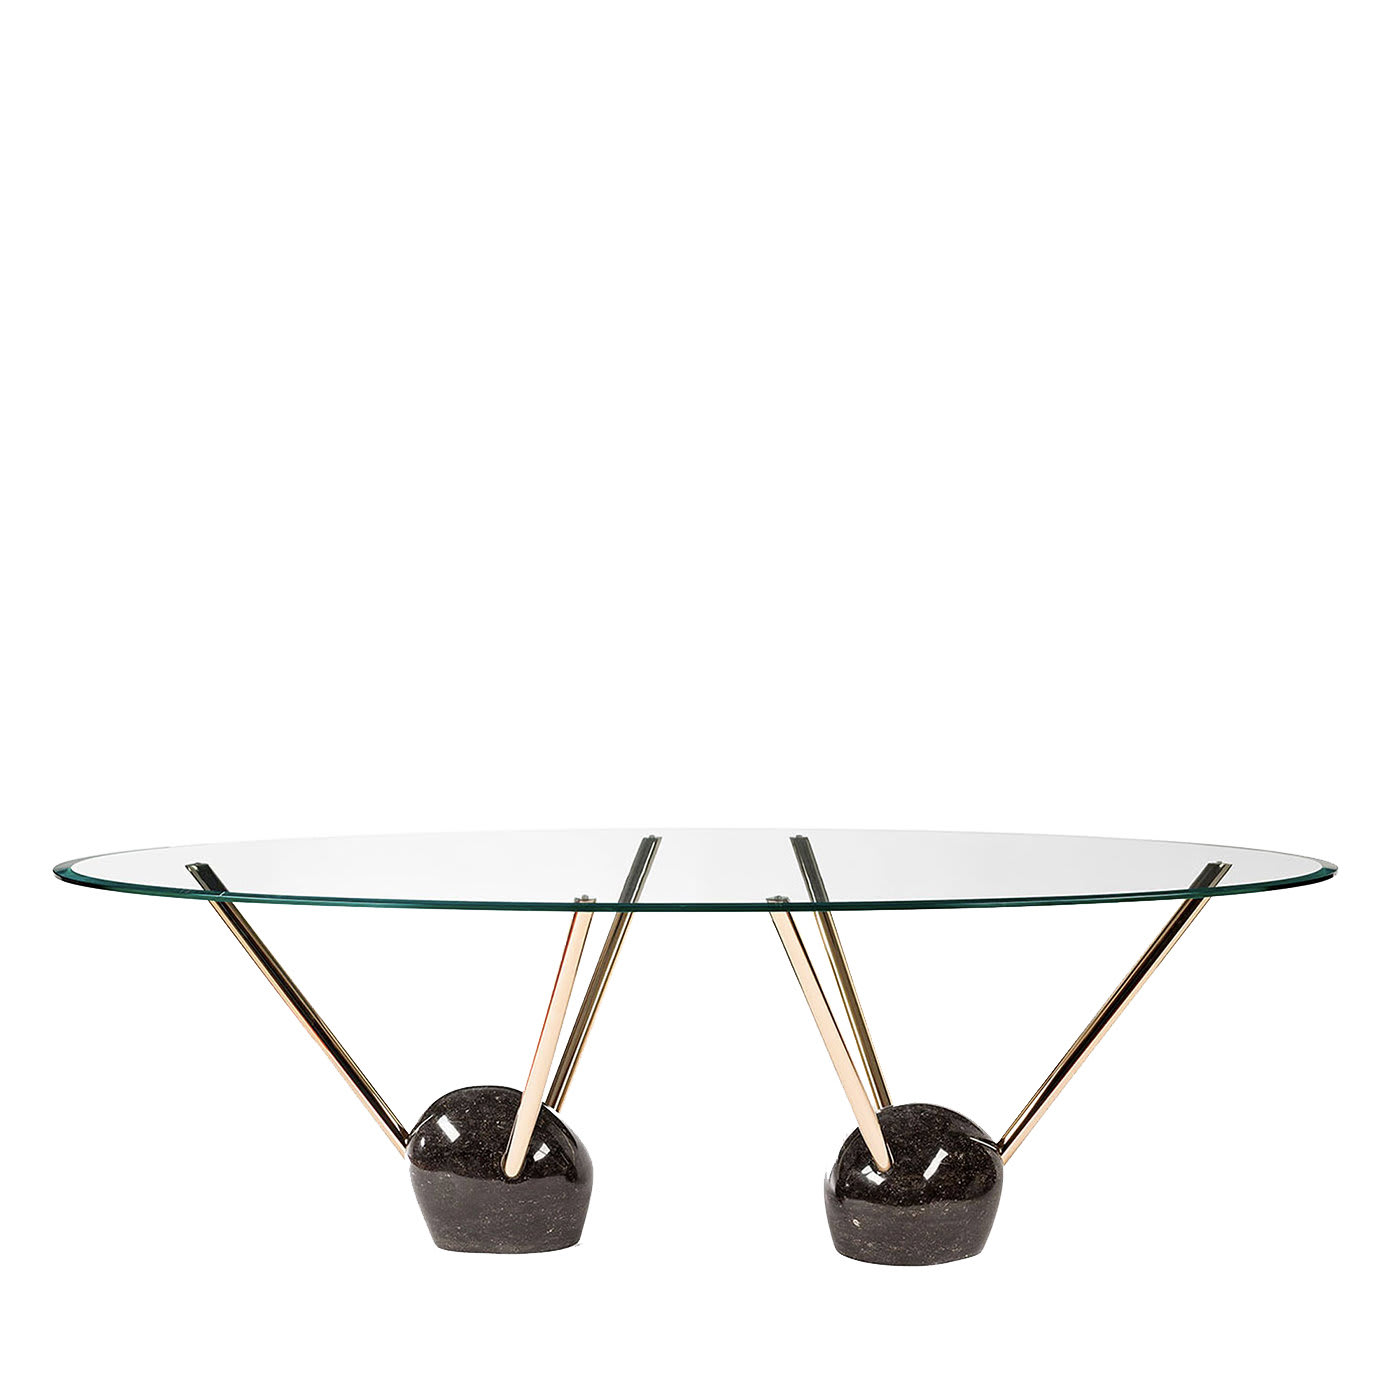 Rays Glass Top Dining Table - VGnewtrend